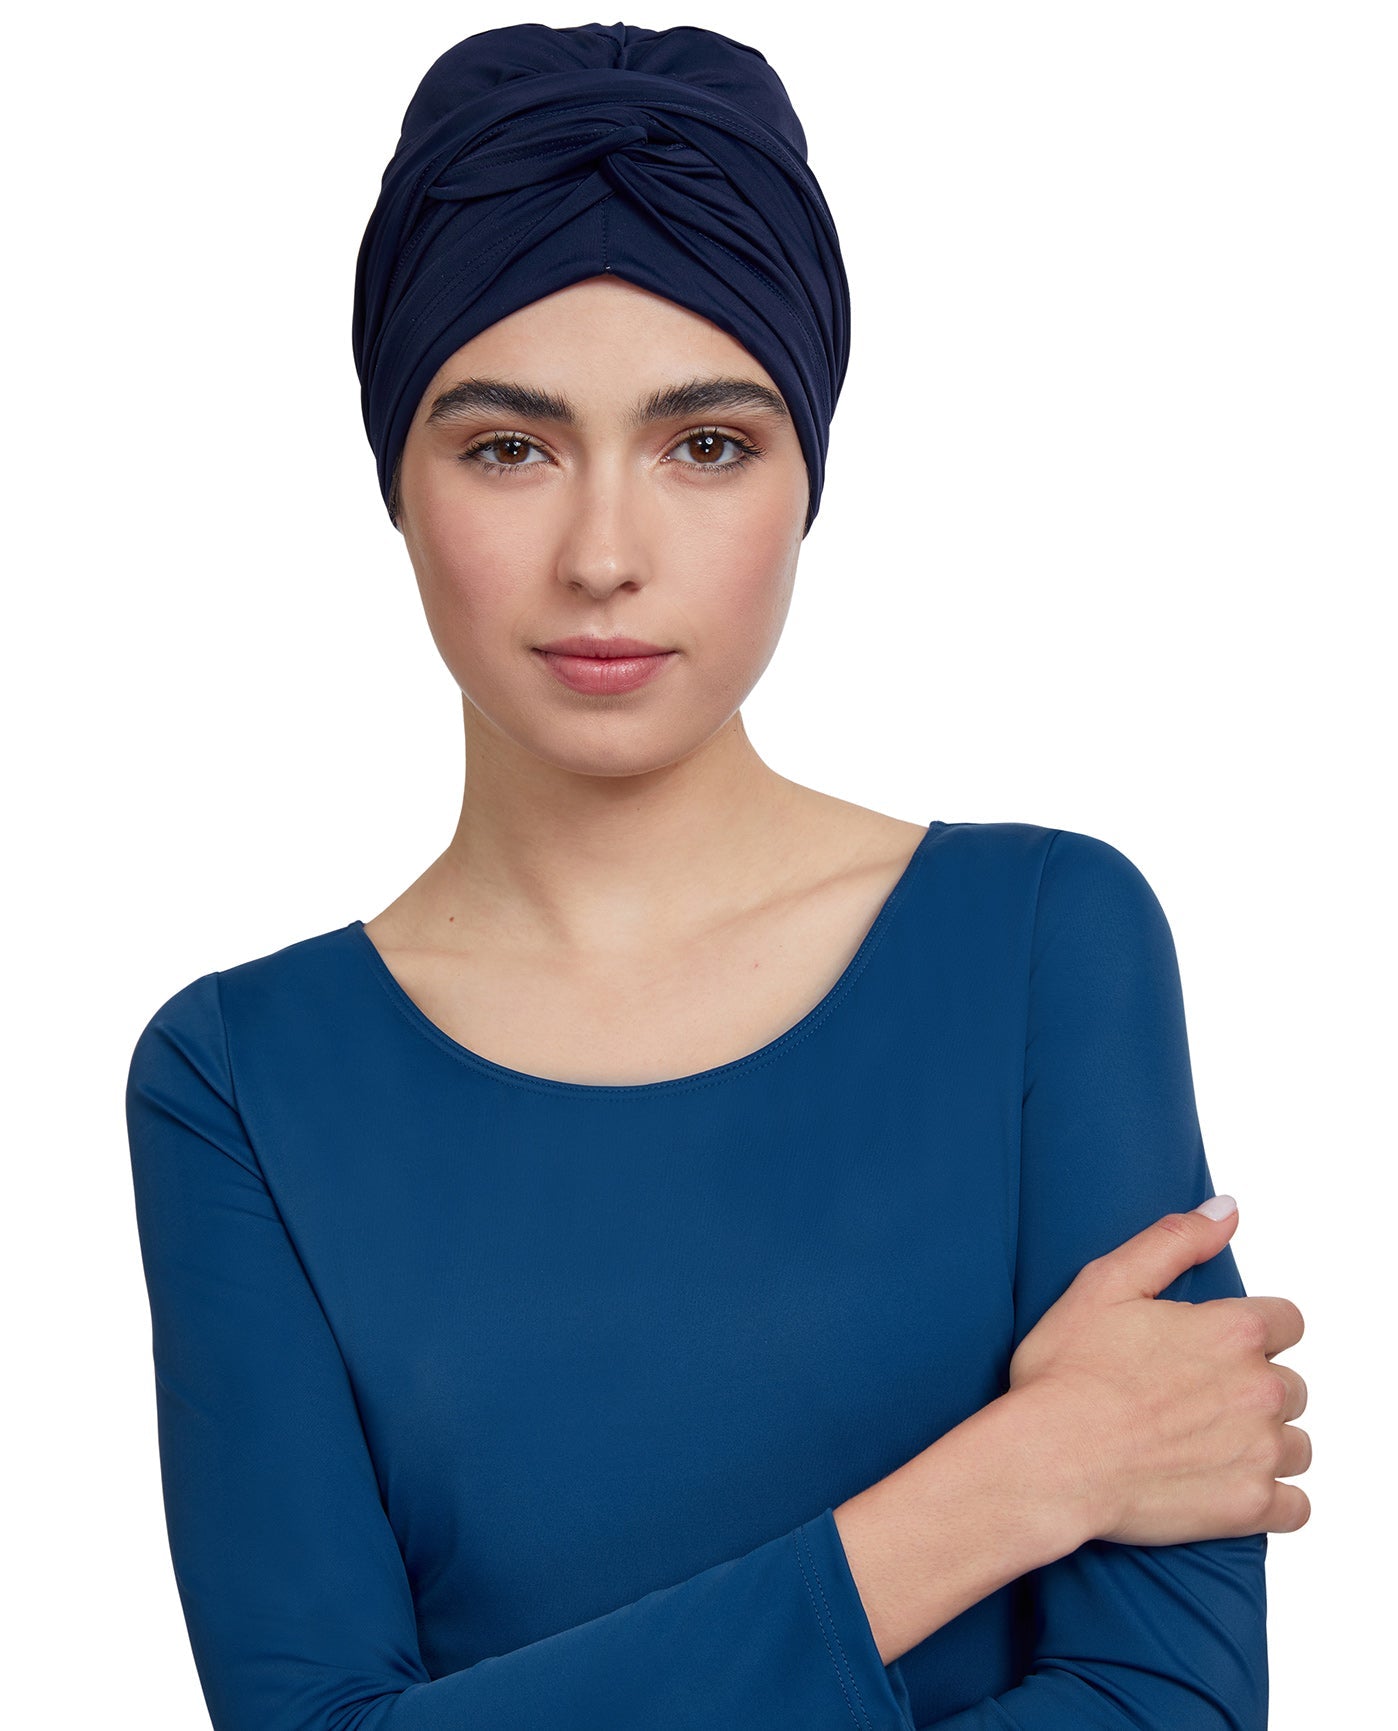 Front View Of Gottex Modest Hair Covering With Tie | GOTTEX MODEST ADMIRAL BLUE